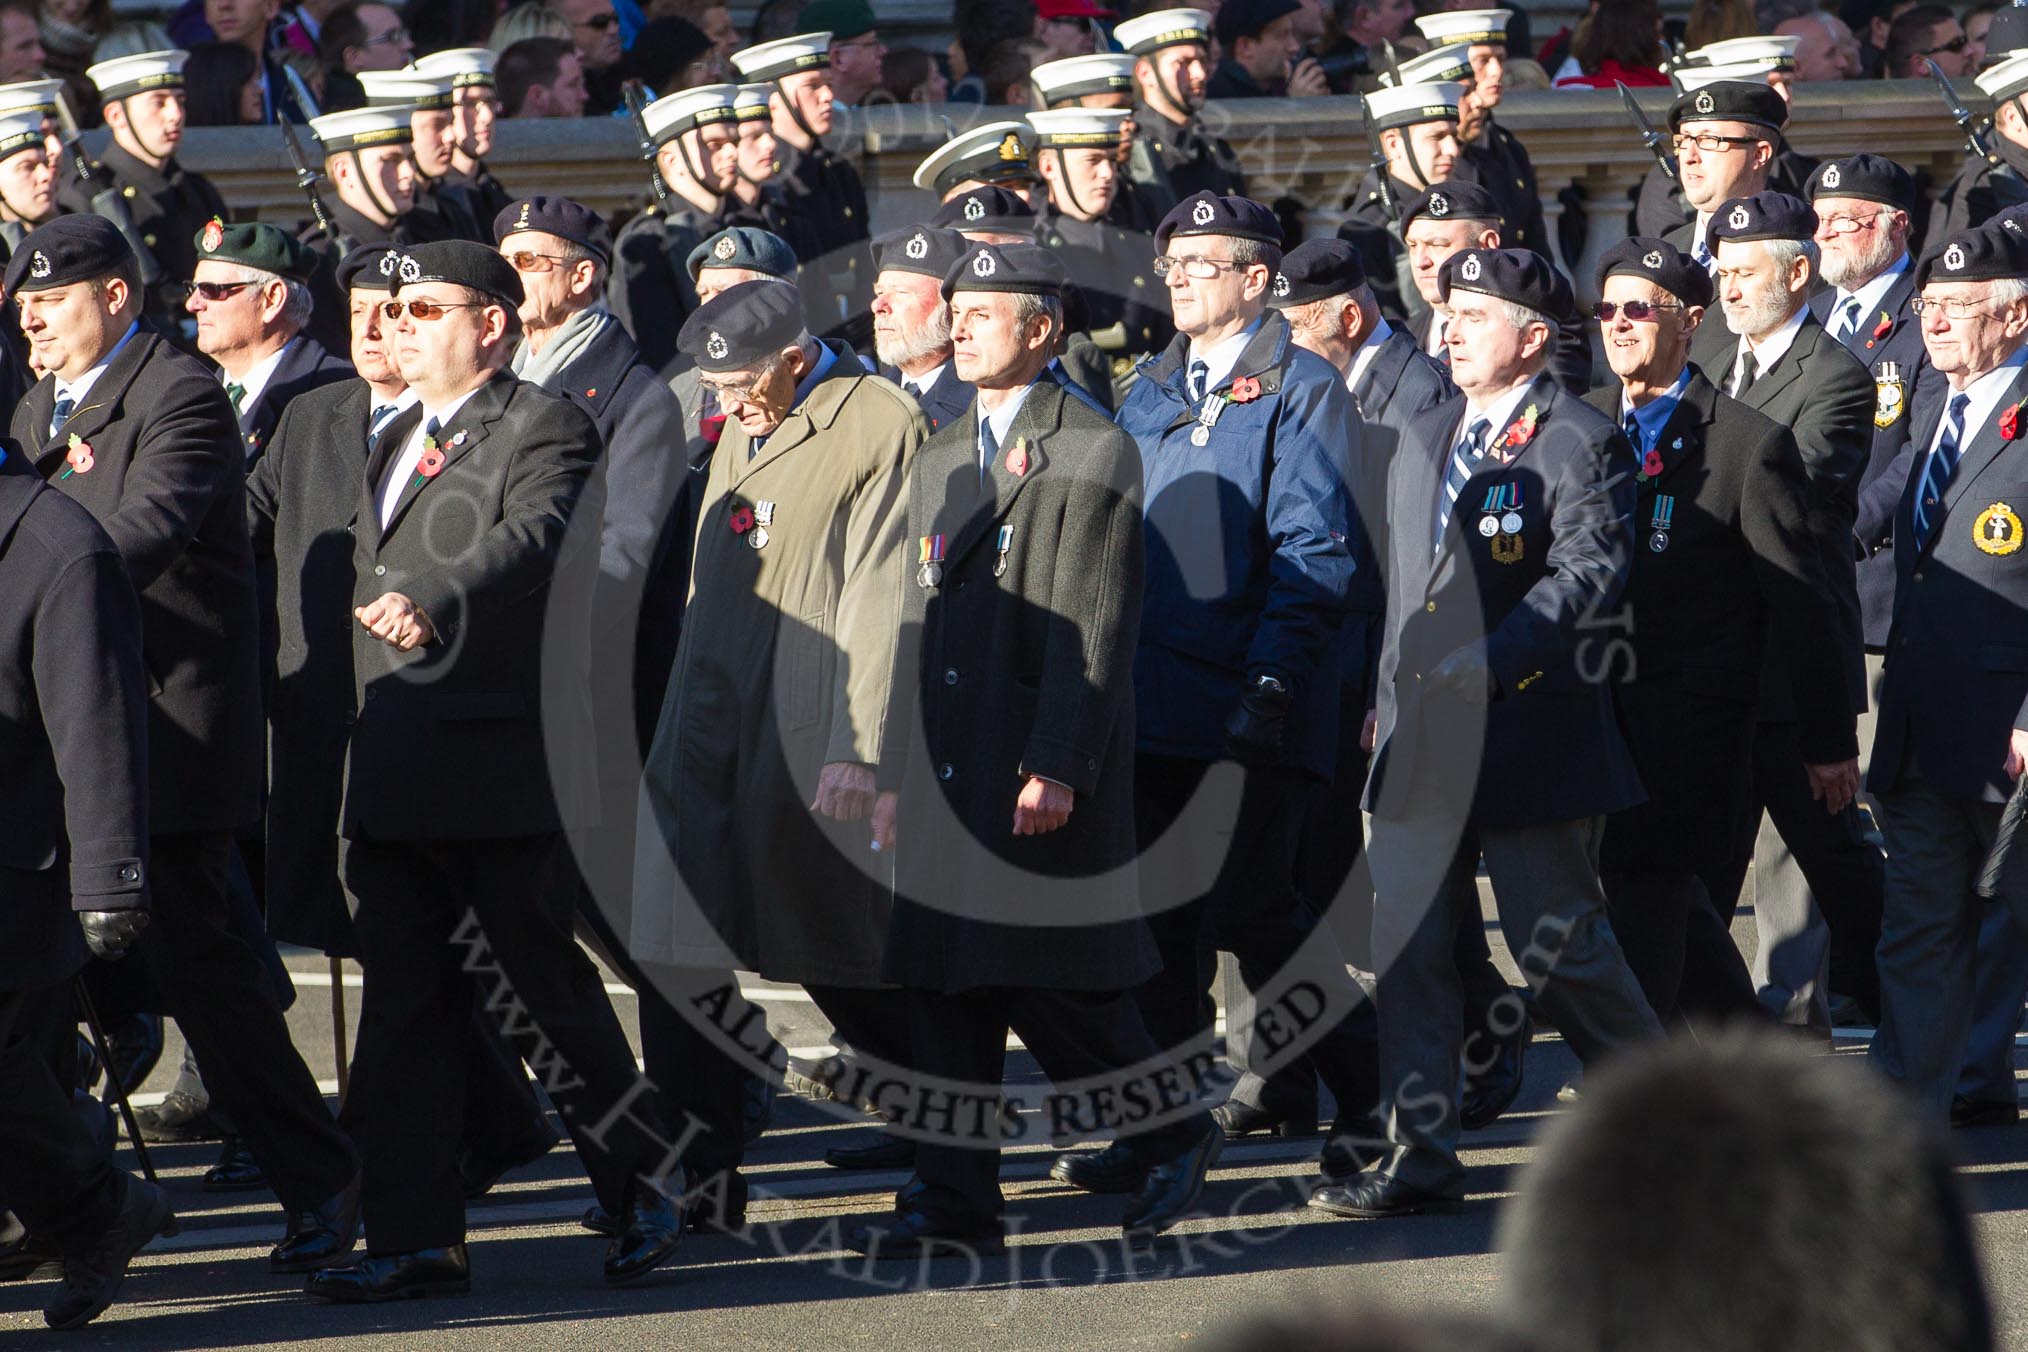 Remembrance Sunday 2012 Cenotaph March Past: Group C15 - Royal Observer Corps Association..
Whitehall, Cenotaph,
London SW1,

United Kingdom,
on 11 November 2012 at 12:03, image #1145